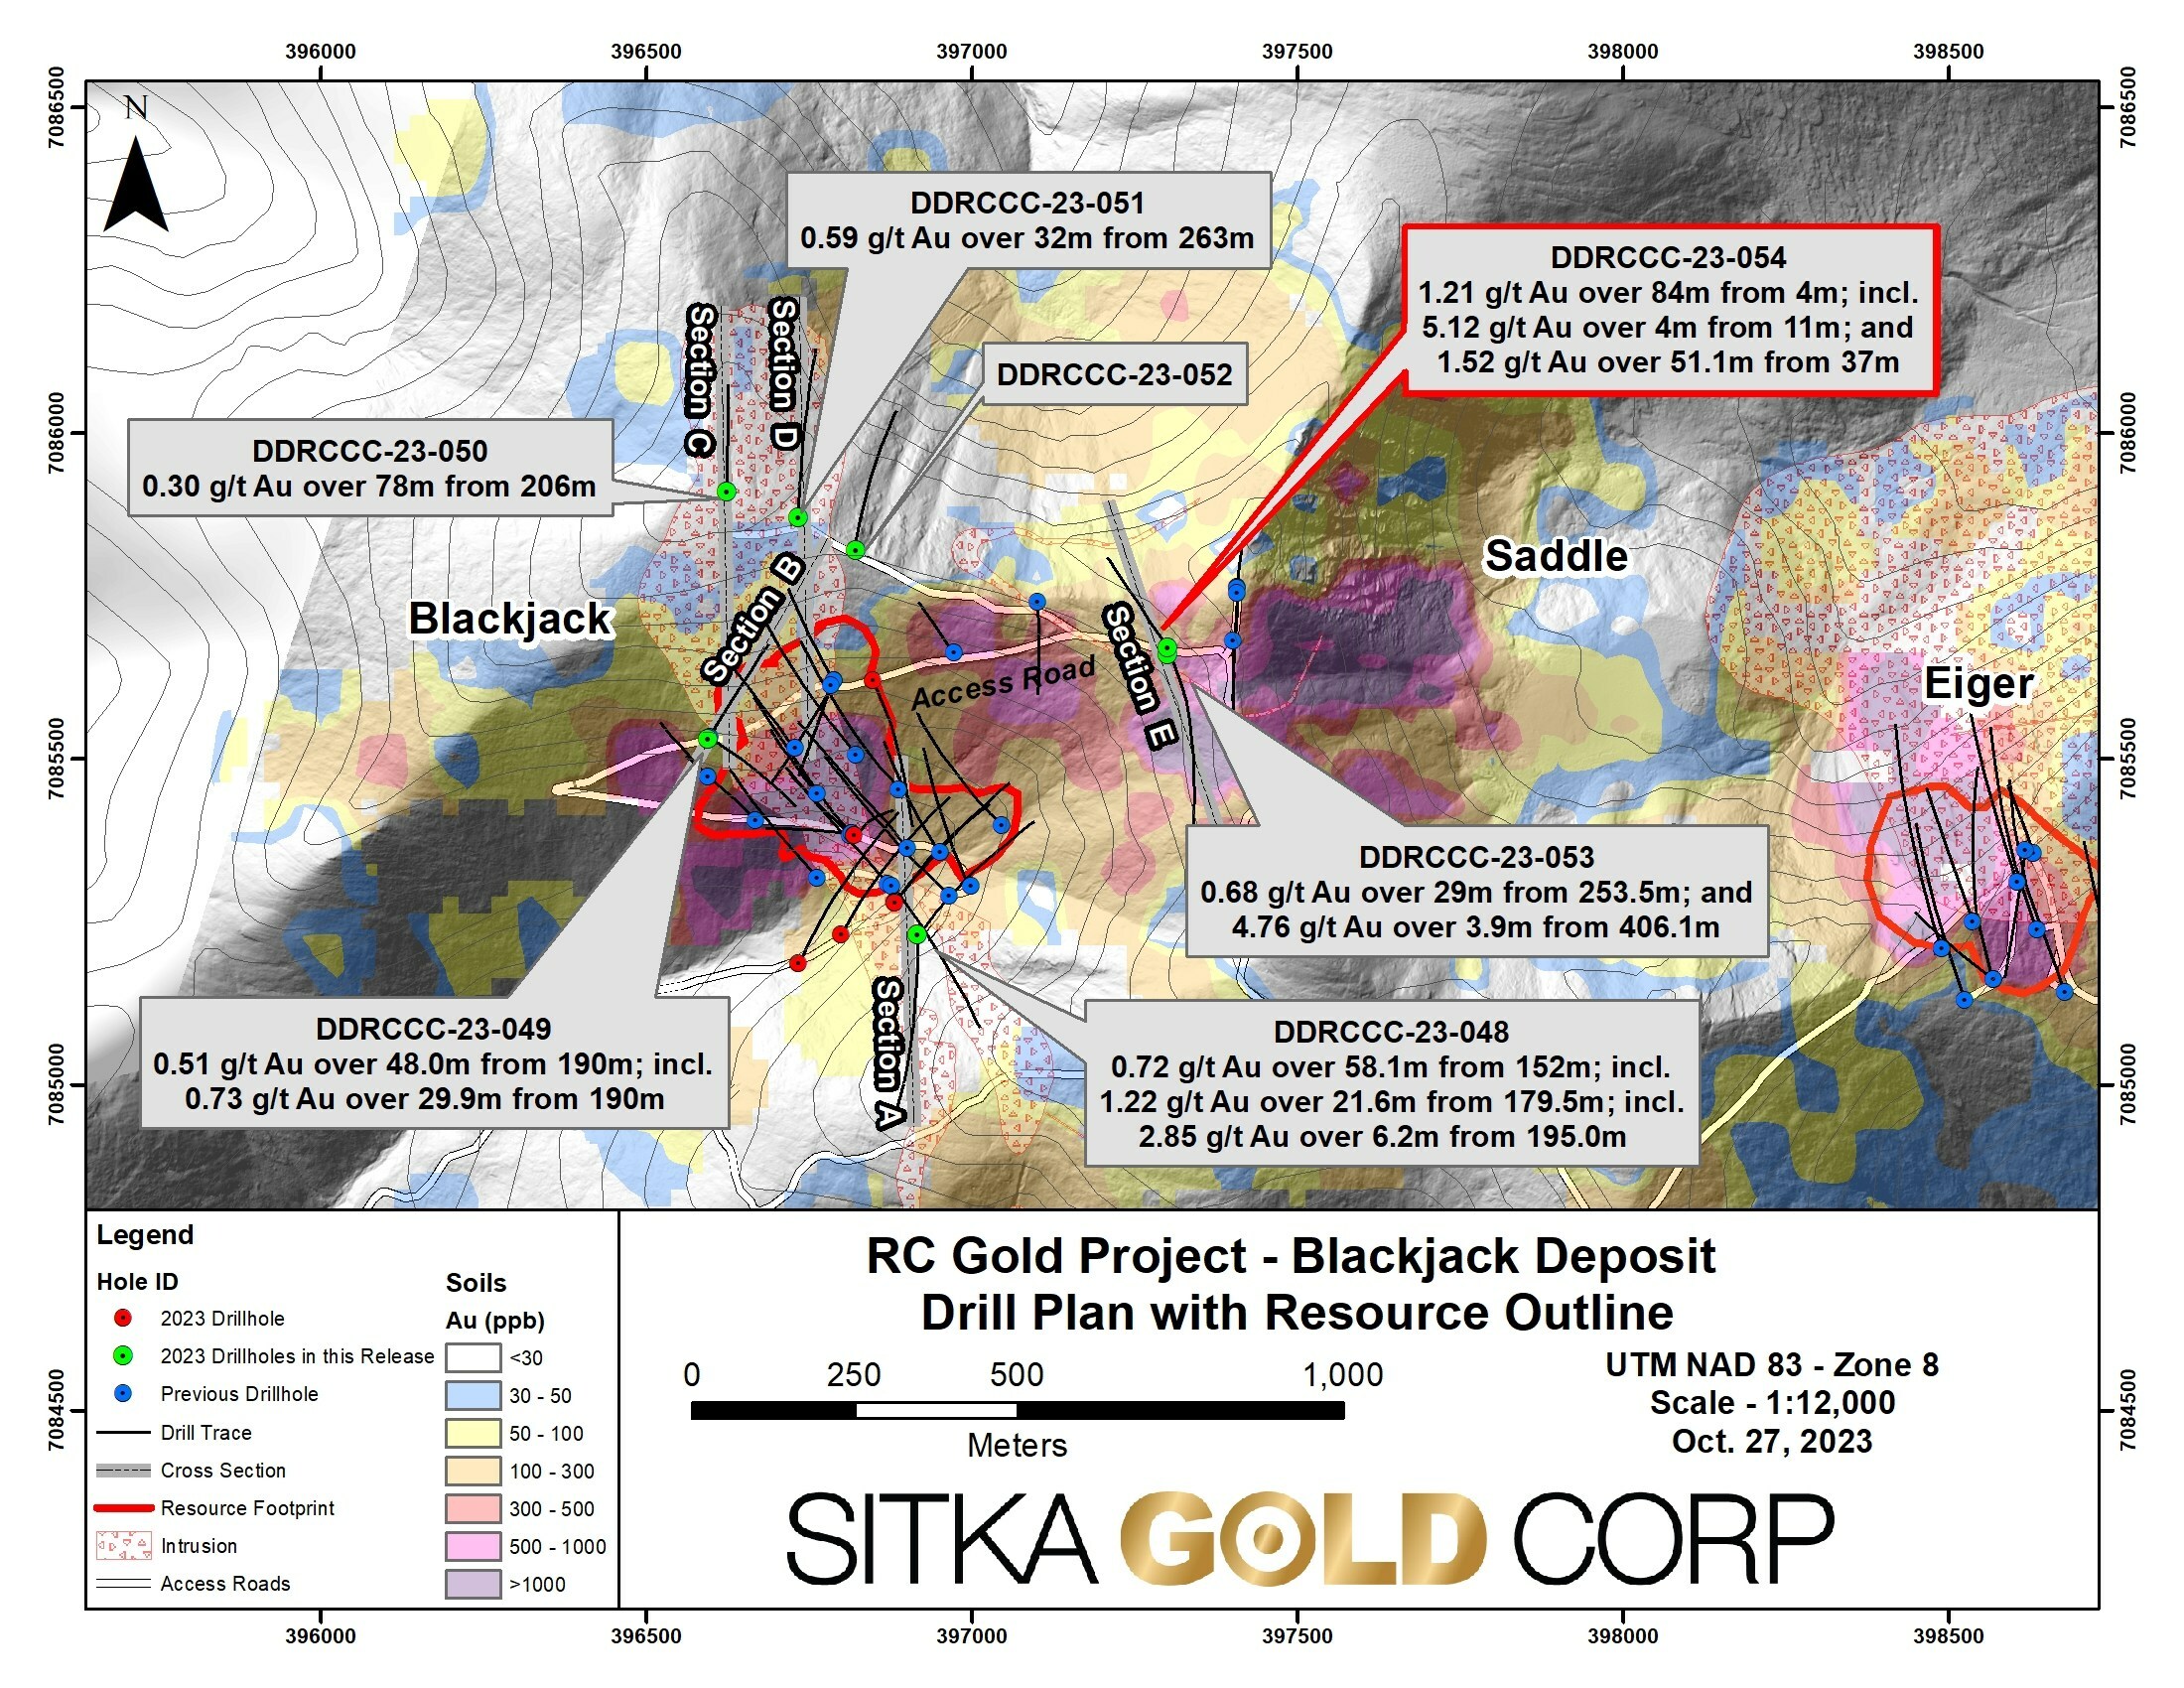 Figure 2: Plan Map Showing the Location of DDRCCC-23-048 through DDRCC-23-054 (CNW Group/Sitka Gold Corp.)